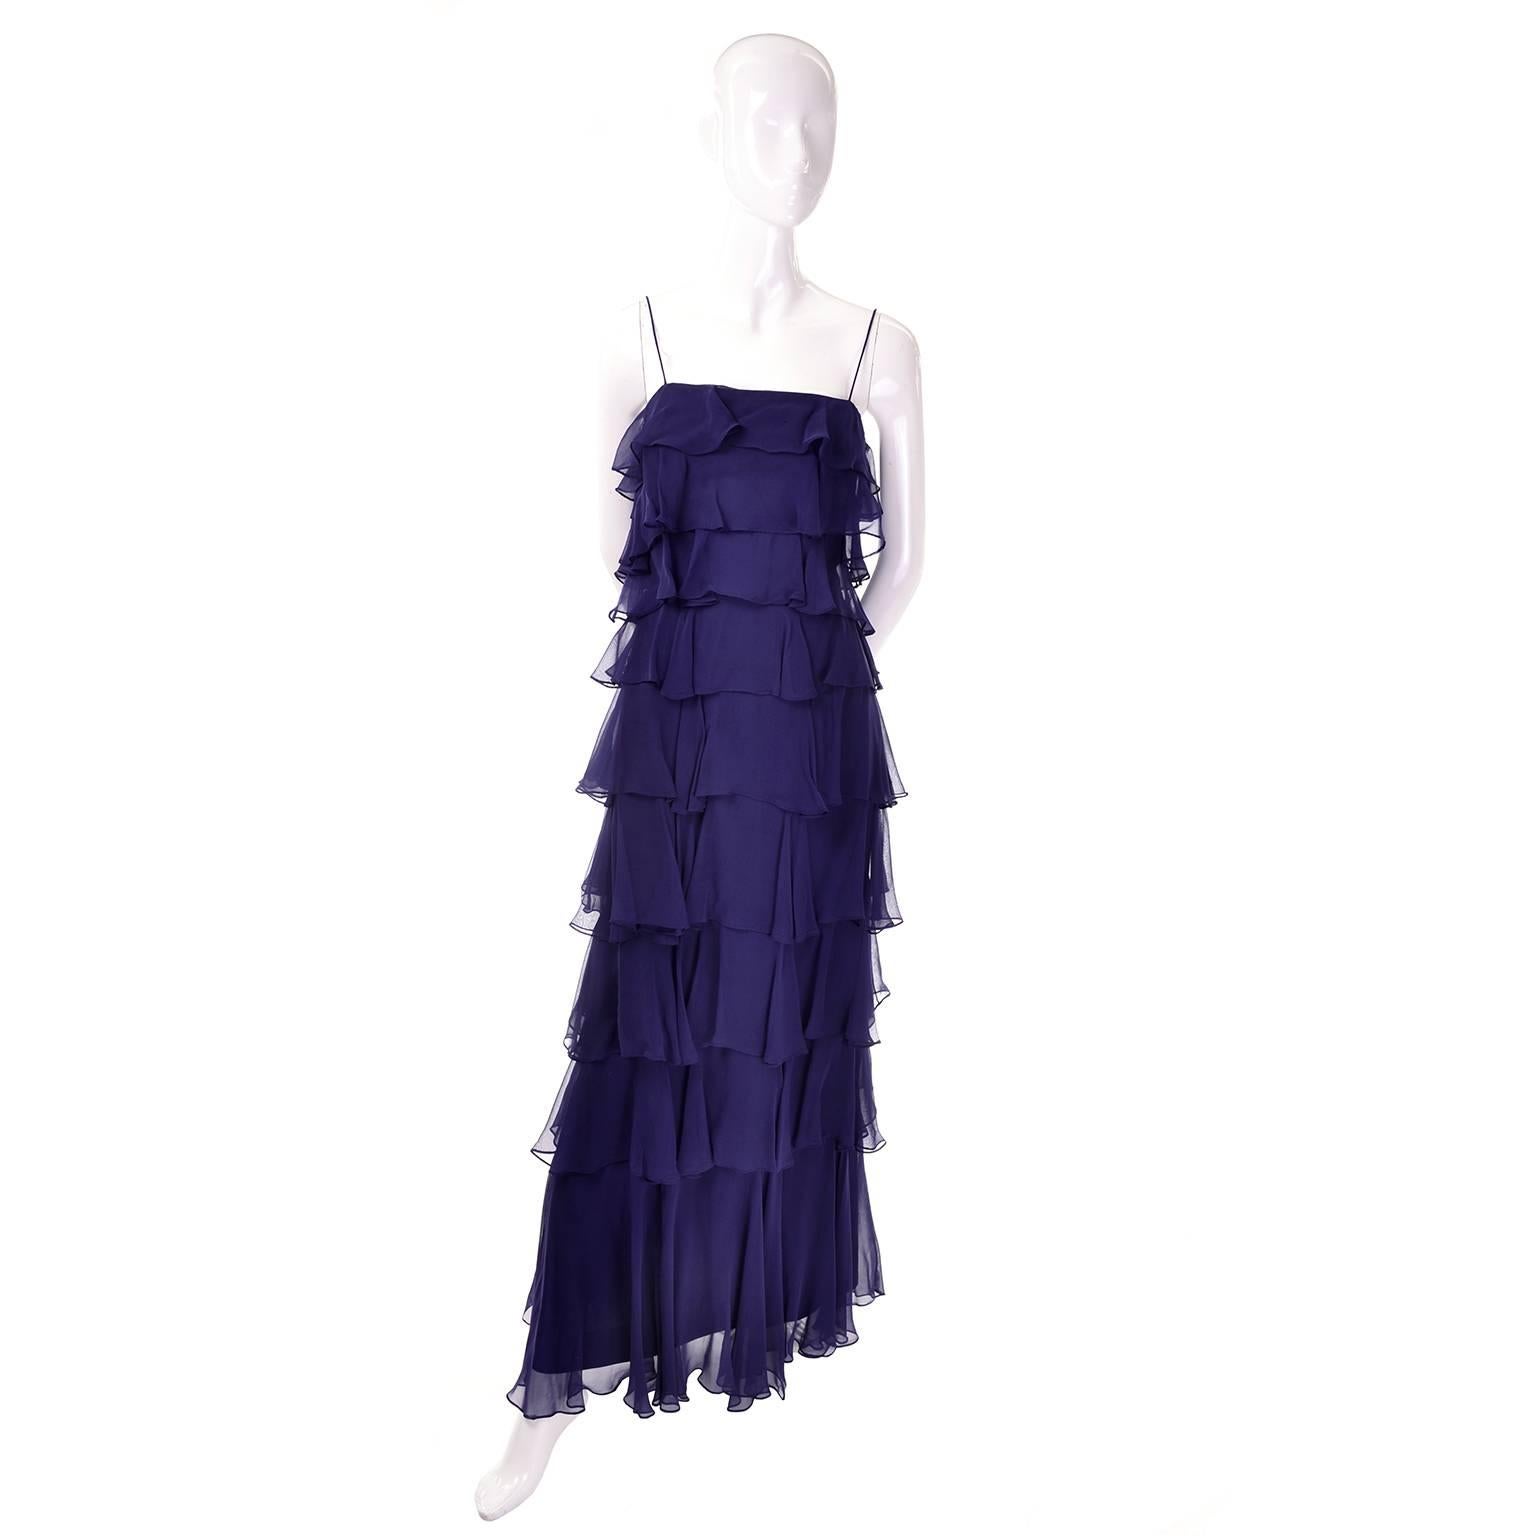 This is a great vintage Fred Perlberg navy blue silk chiffon ruffled vintage dress with a matching shawl. This dramatic long navy maxi dress has a sheer chiffon tiered ruffle overlay and spaghetti straps. Zips up the back and comes with a sheer